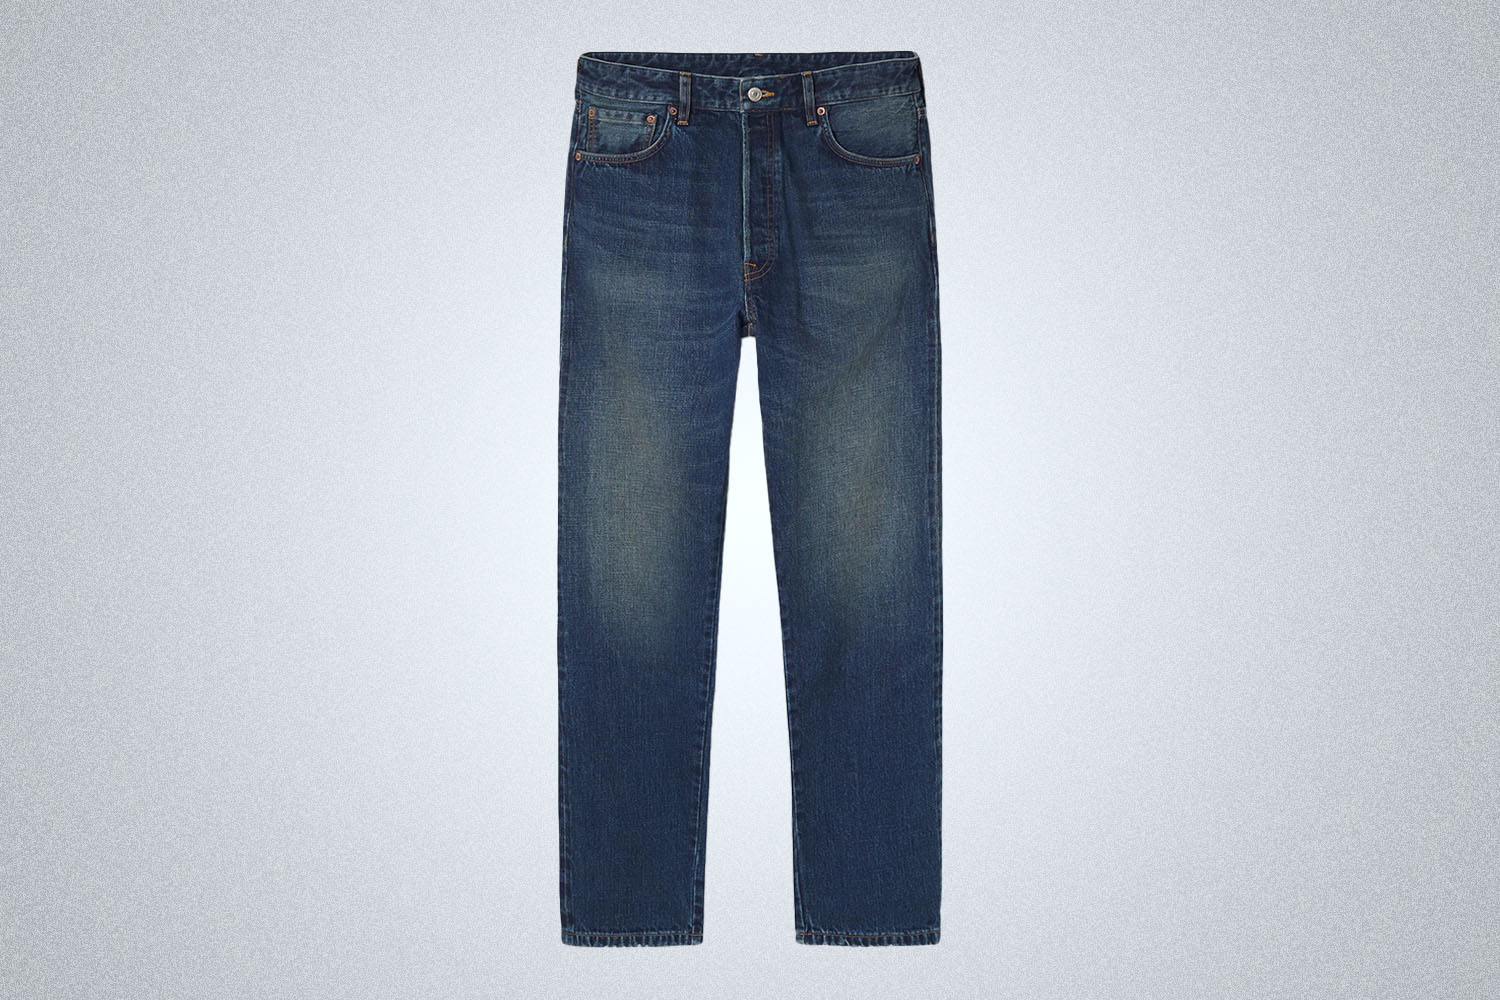 a pair of dark wash jeans from Buck Mason on a grey background